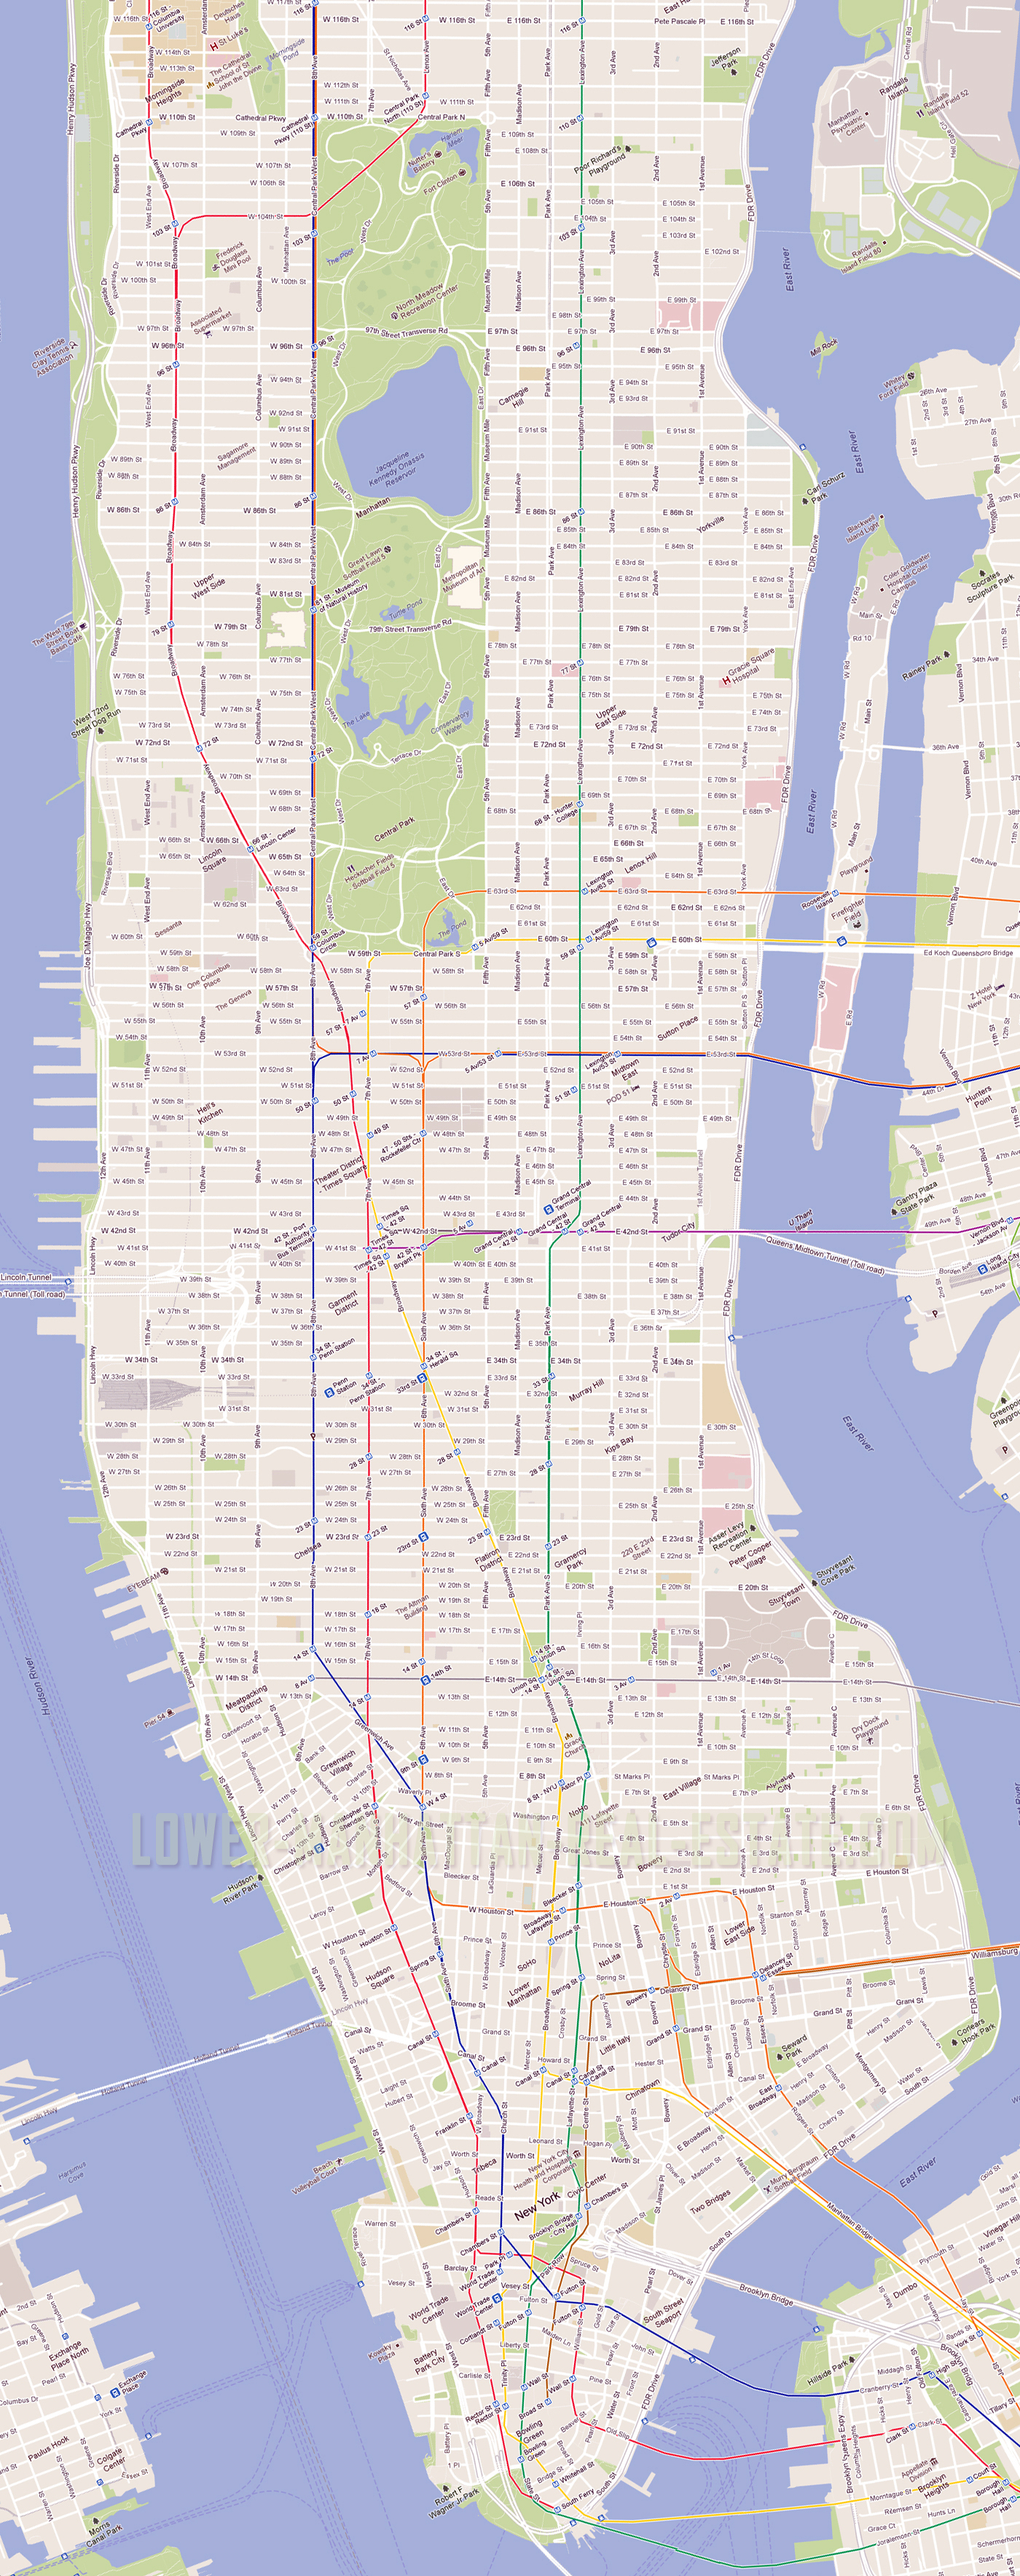 detailed-road-map-of-manhattan-nyc-manhattan-nyc-detailed-road-map